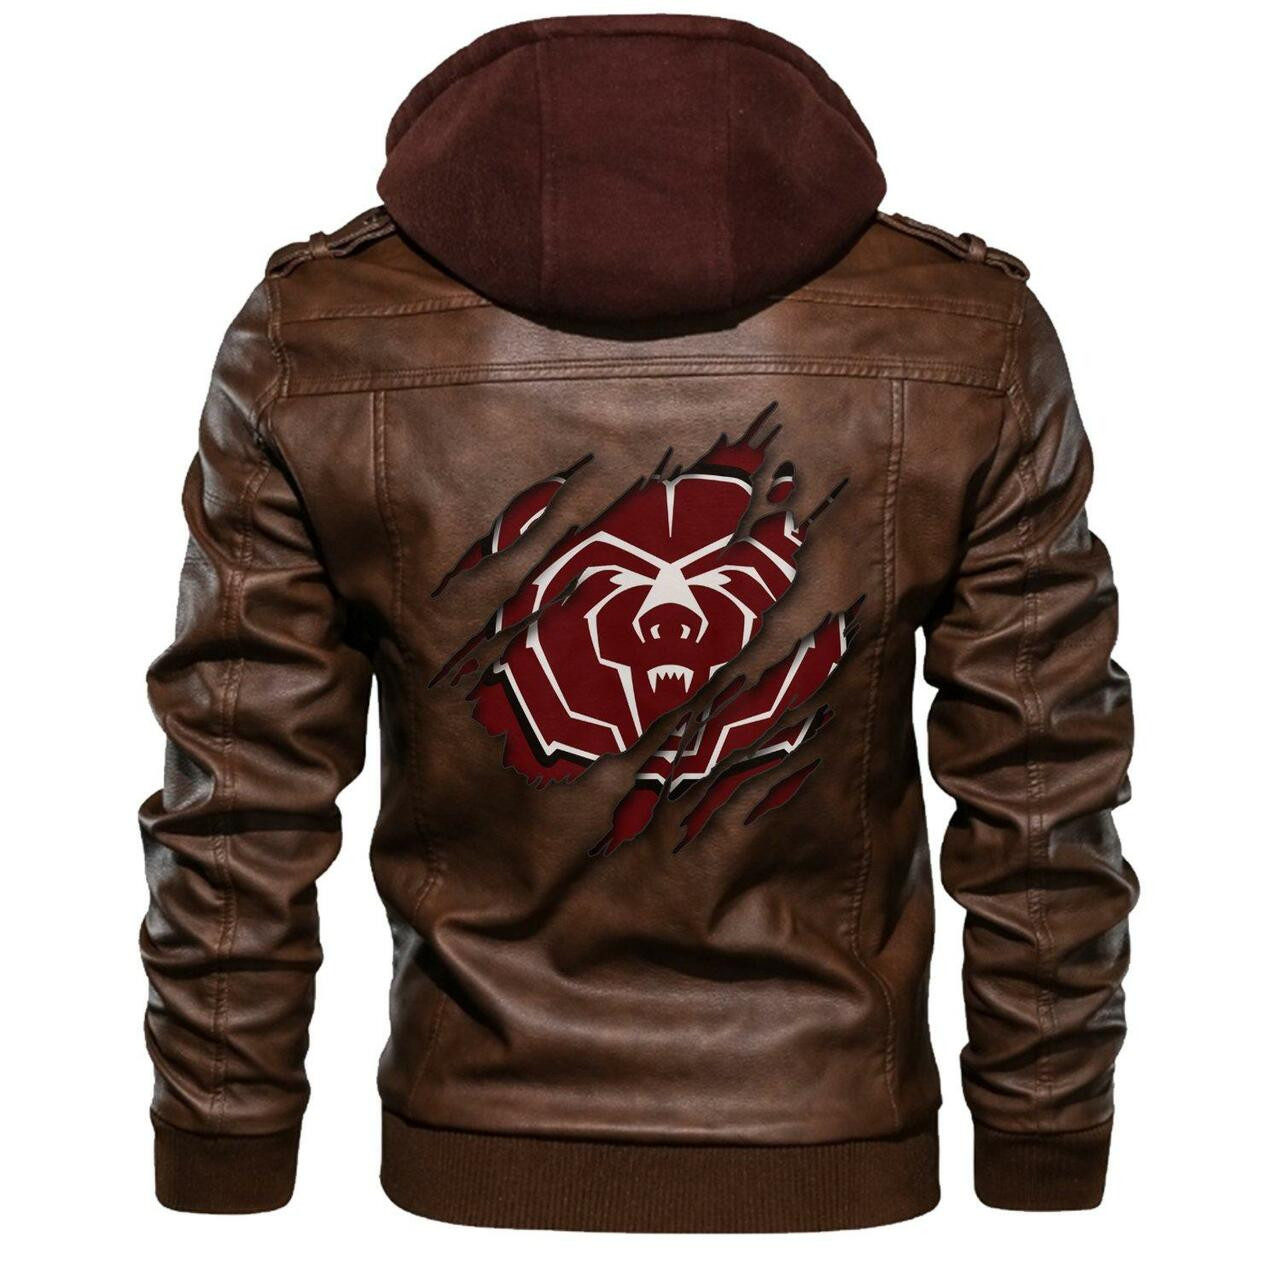 Don't wait another minute, Get Hot Leather Jacket today 106